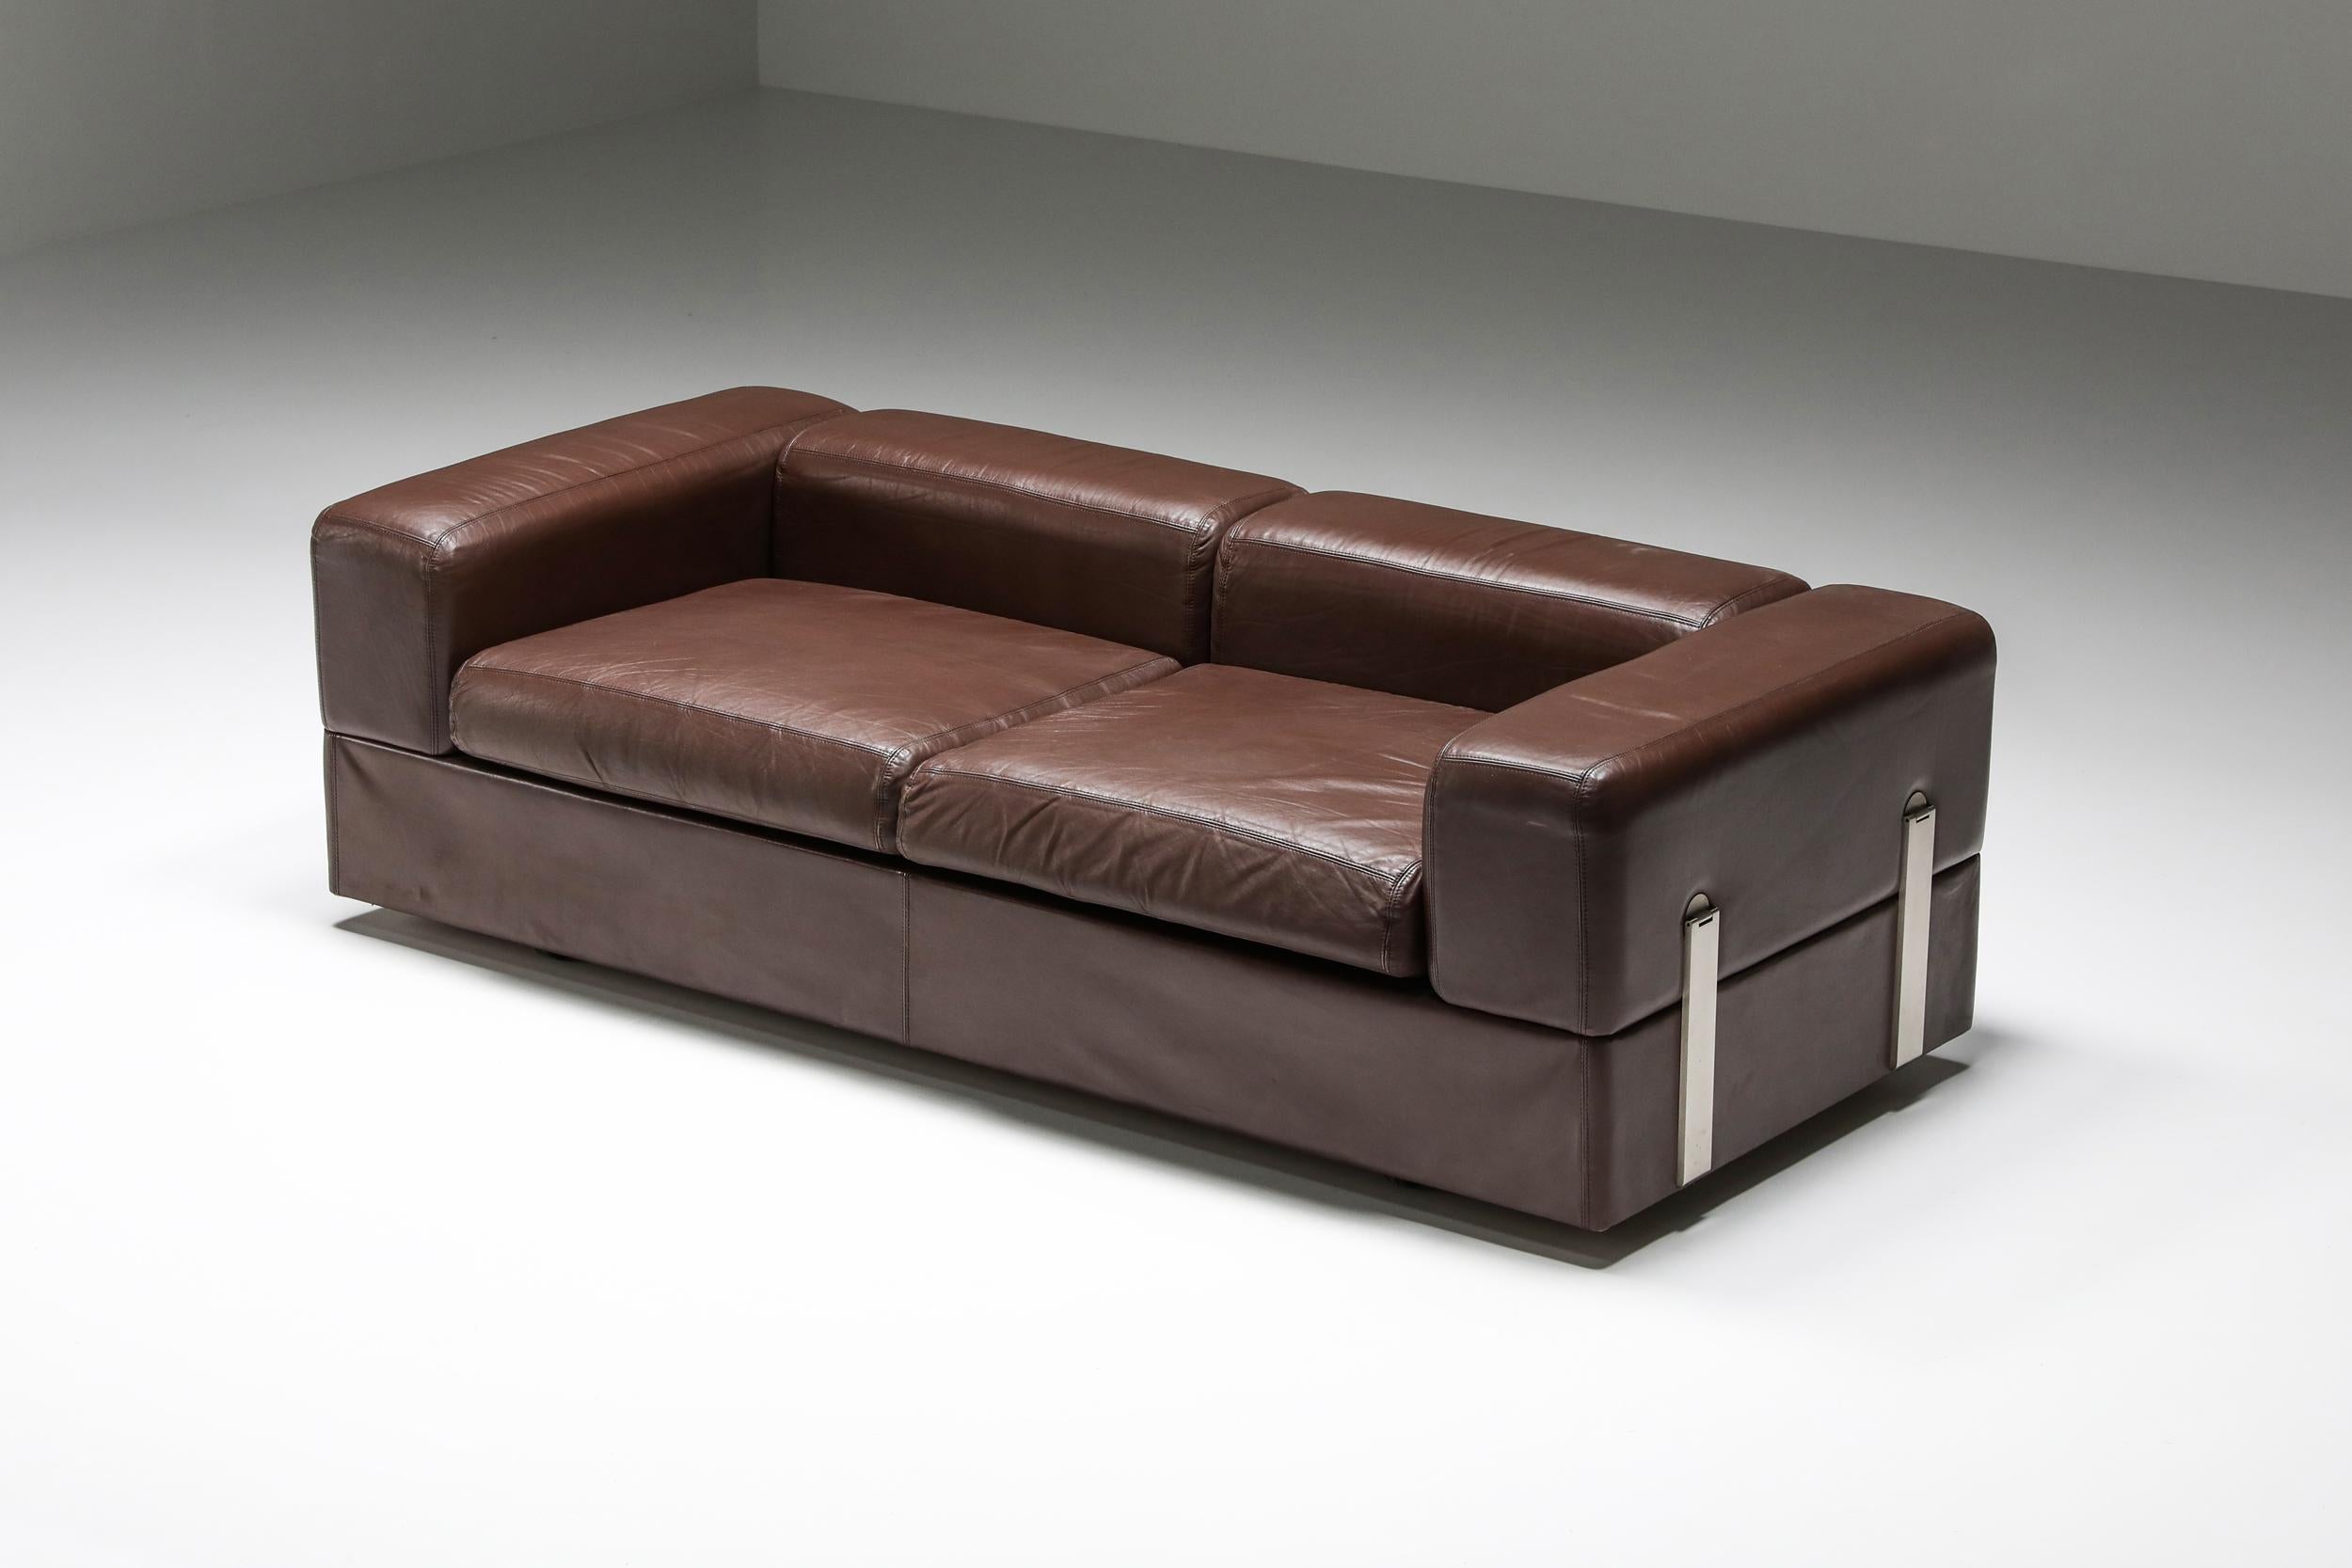 Post-Modern Daybed Sofa 711 by Tito Agnoli for Cinova in Brown Leather, 1960 In Excellent Condition For Sale In Antwerp, BE